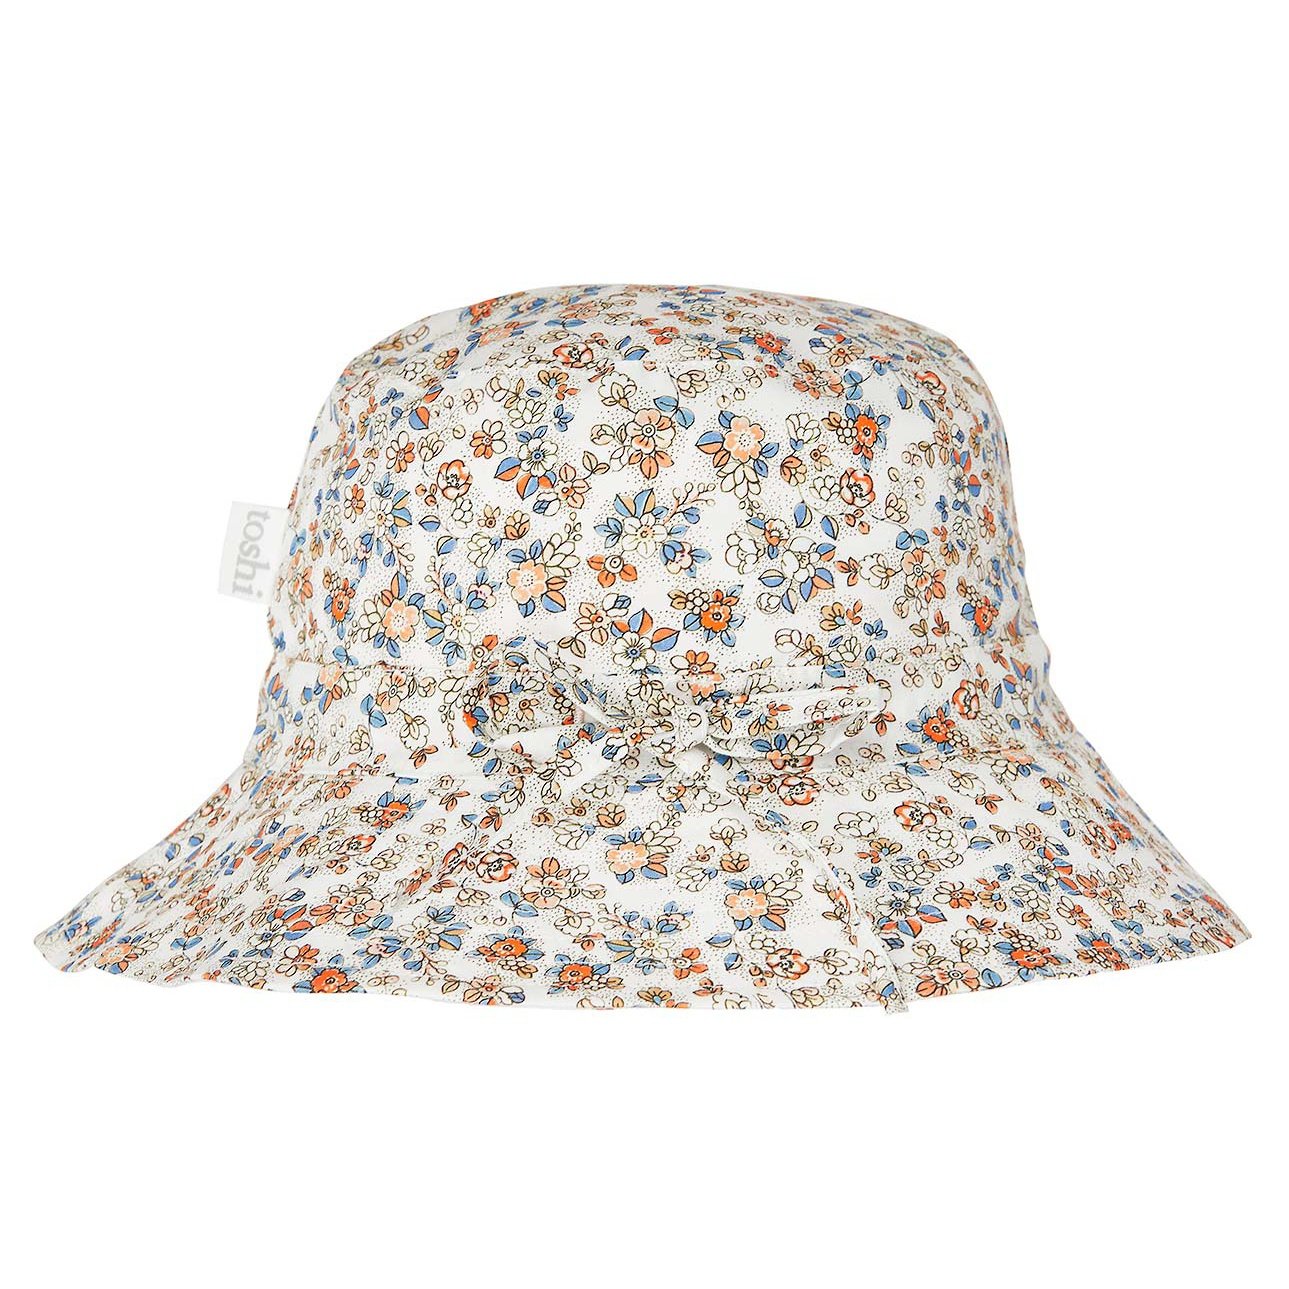 TOSHI | Sunhat Libby - Lilly (6634166747196)